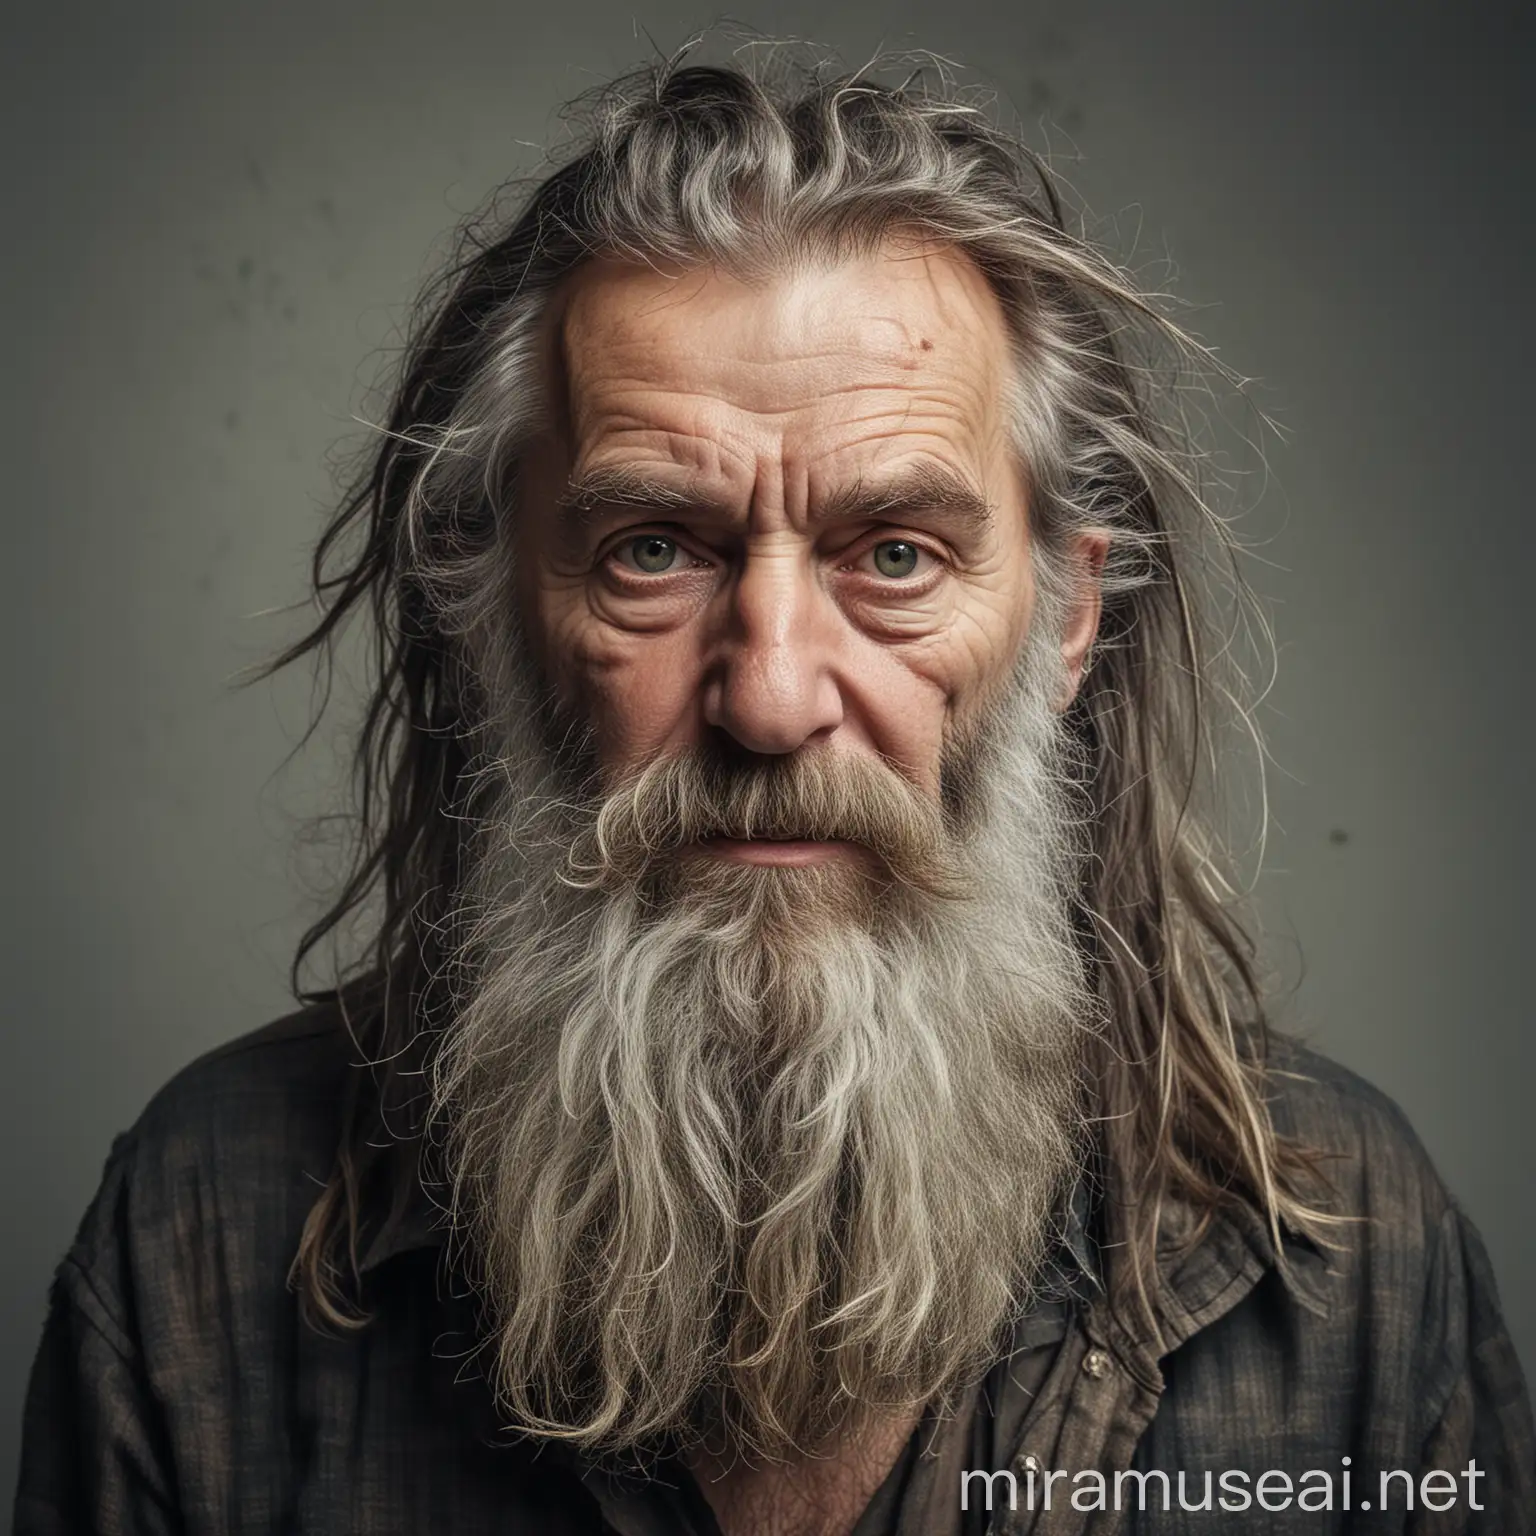 Heavily Bearded Old Man with Disheveled Appearance